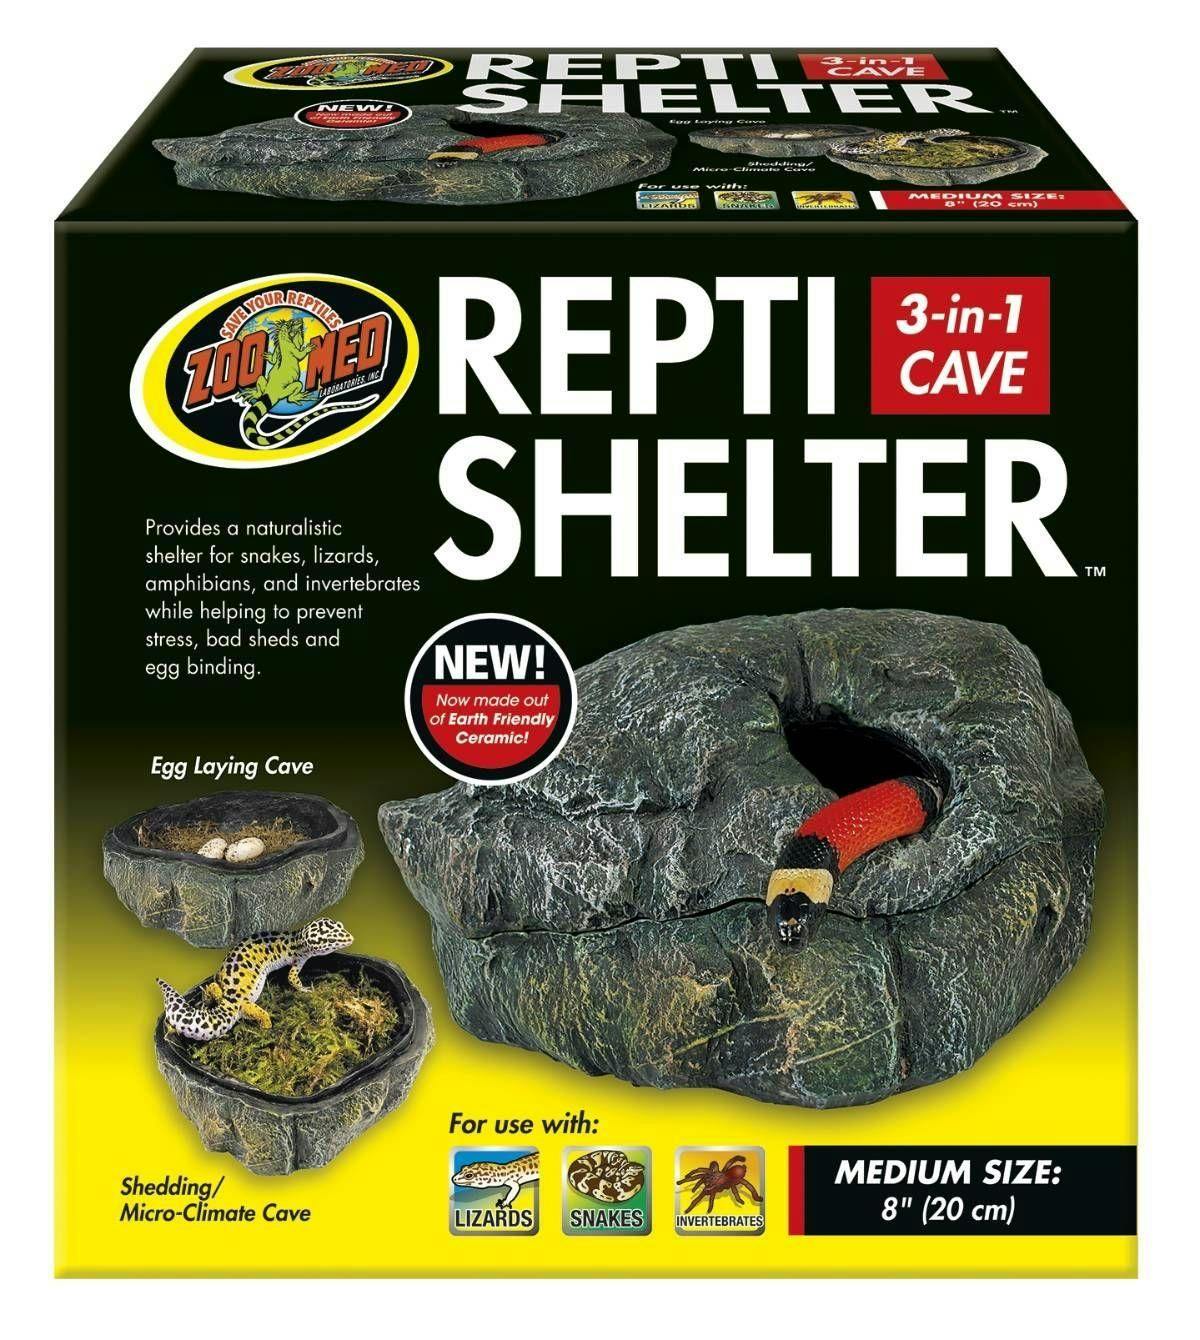 Image for Zoo Med Repti Shelter 3-in-1 Cave (Medium) by Josh's Frogs